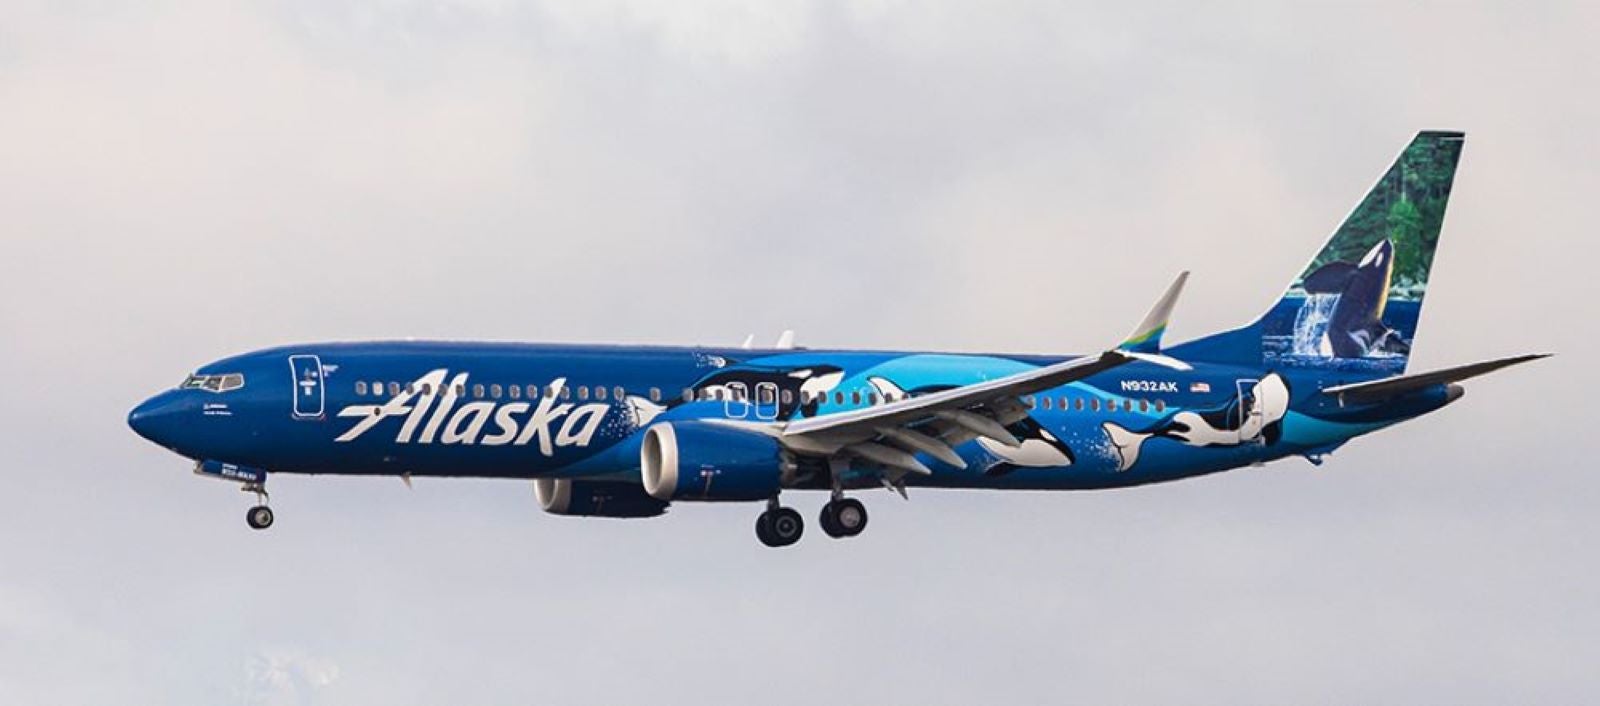 Orca Livery_Alaska Airlines